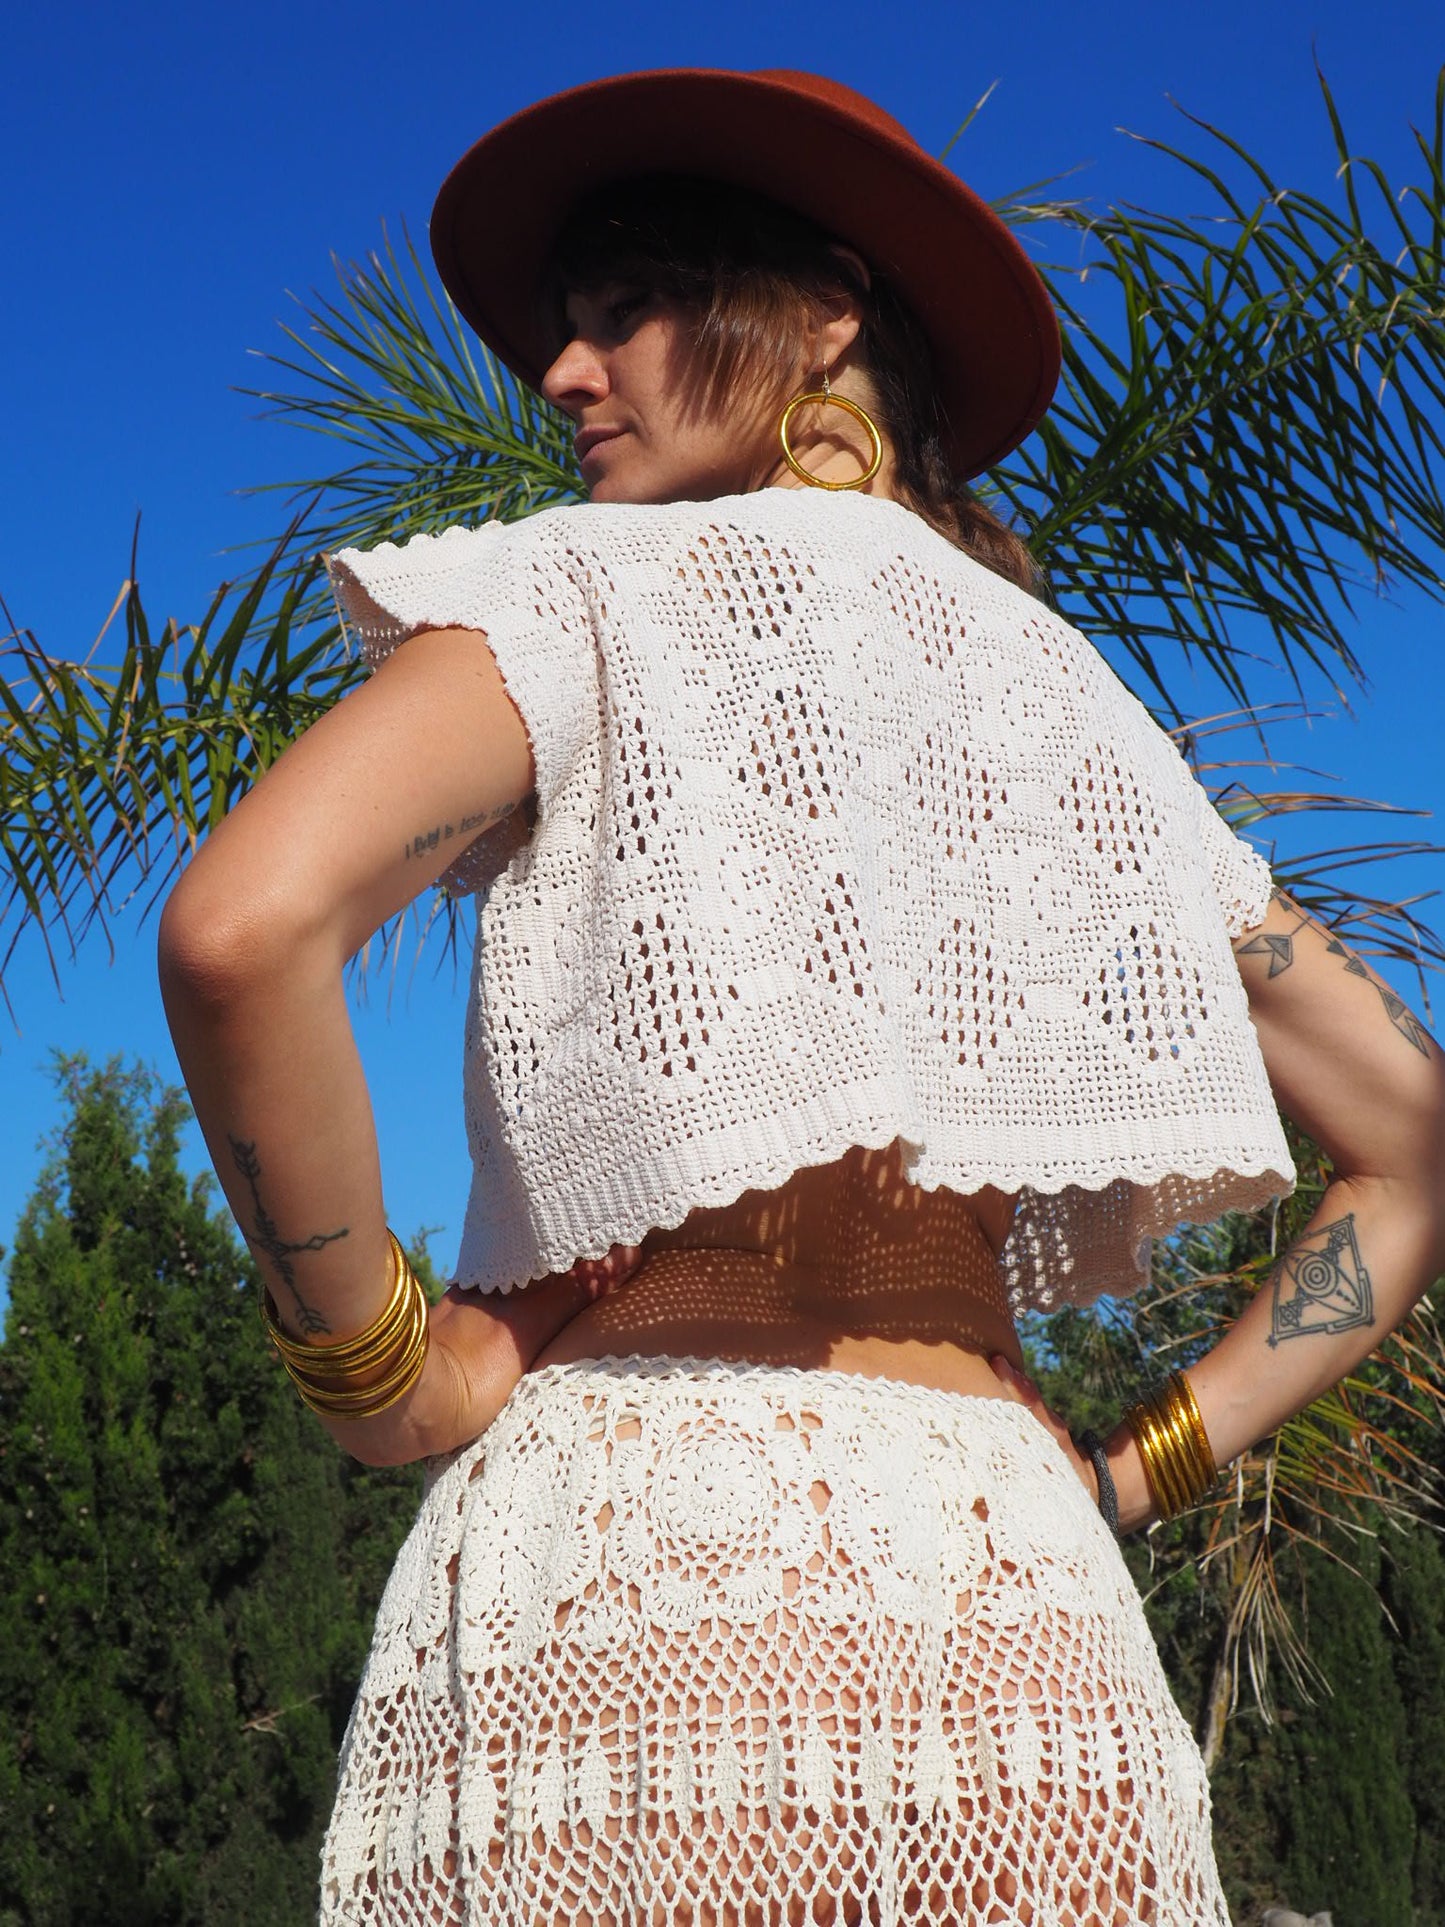 Antique handmade lace crochet up-cycled top by Vagabond Ibiza